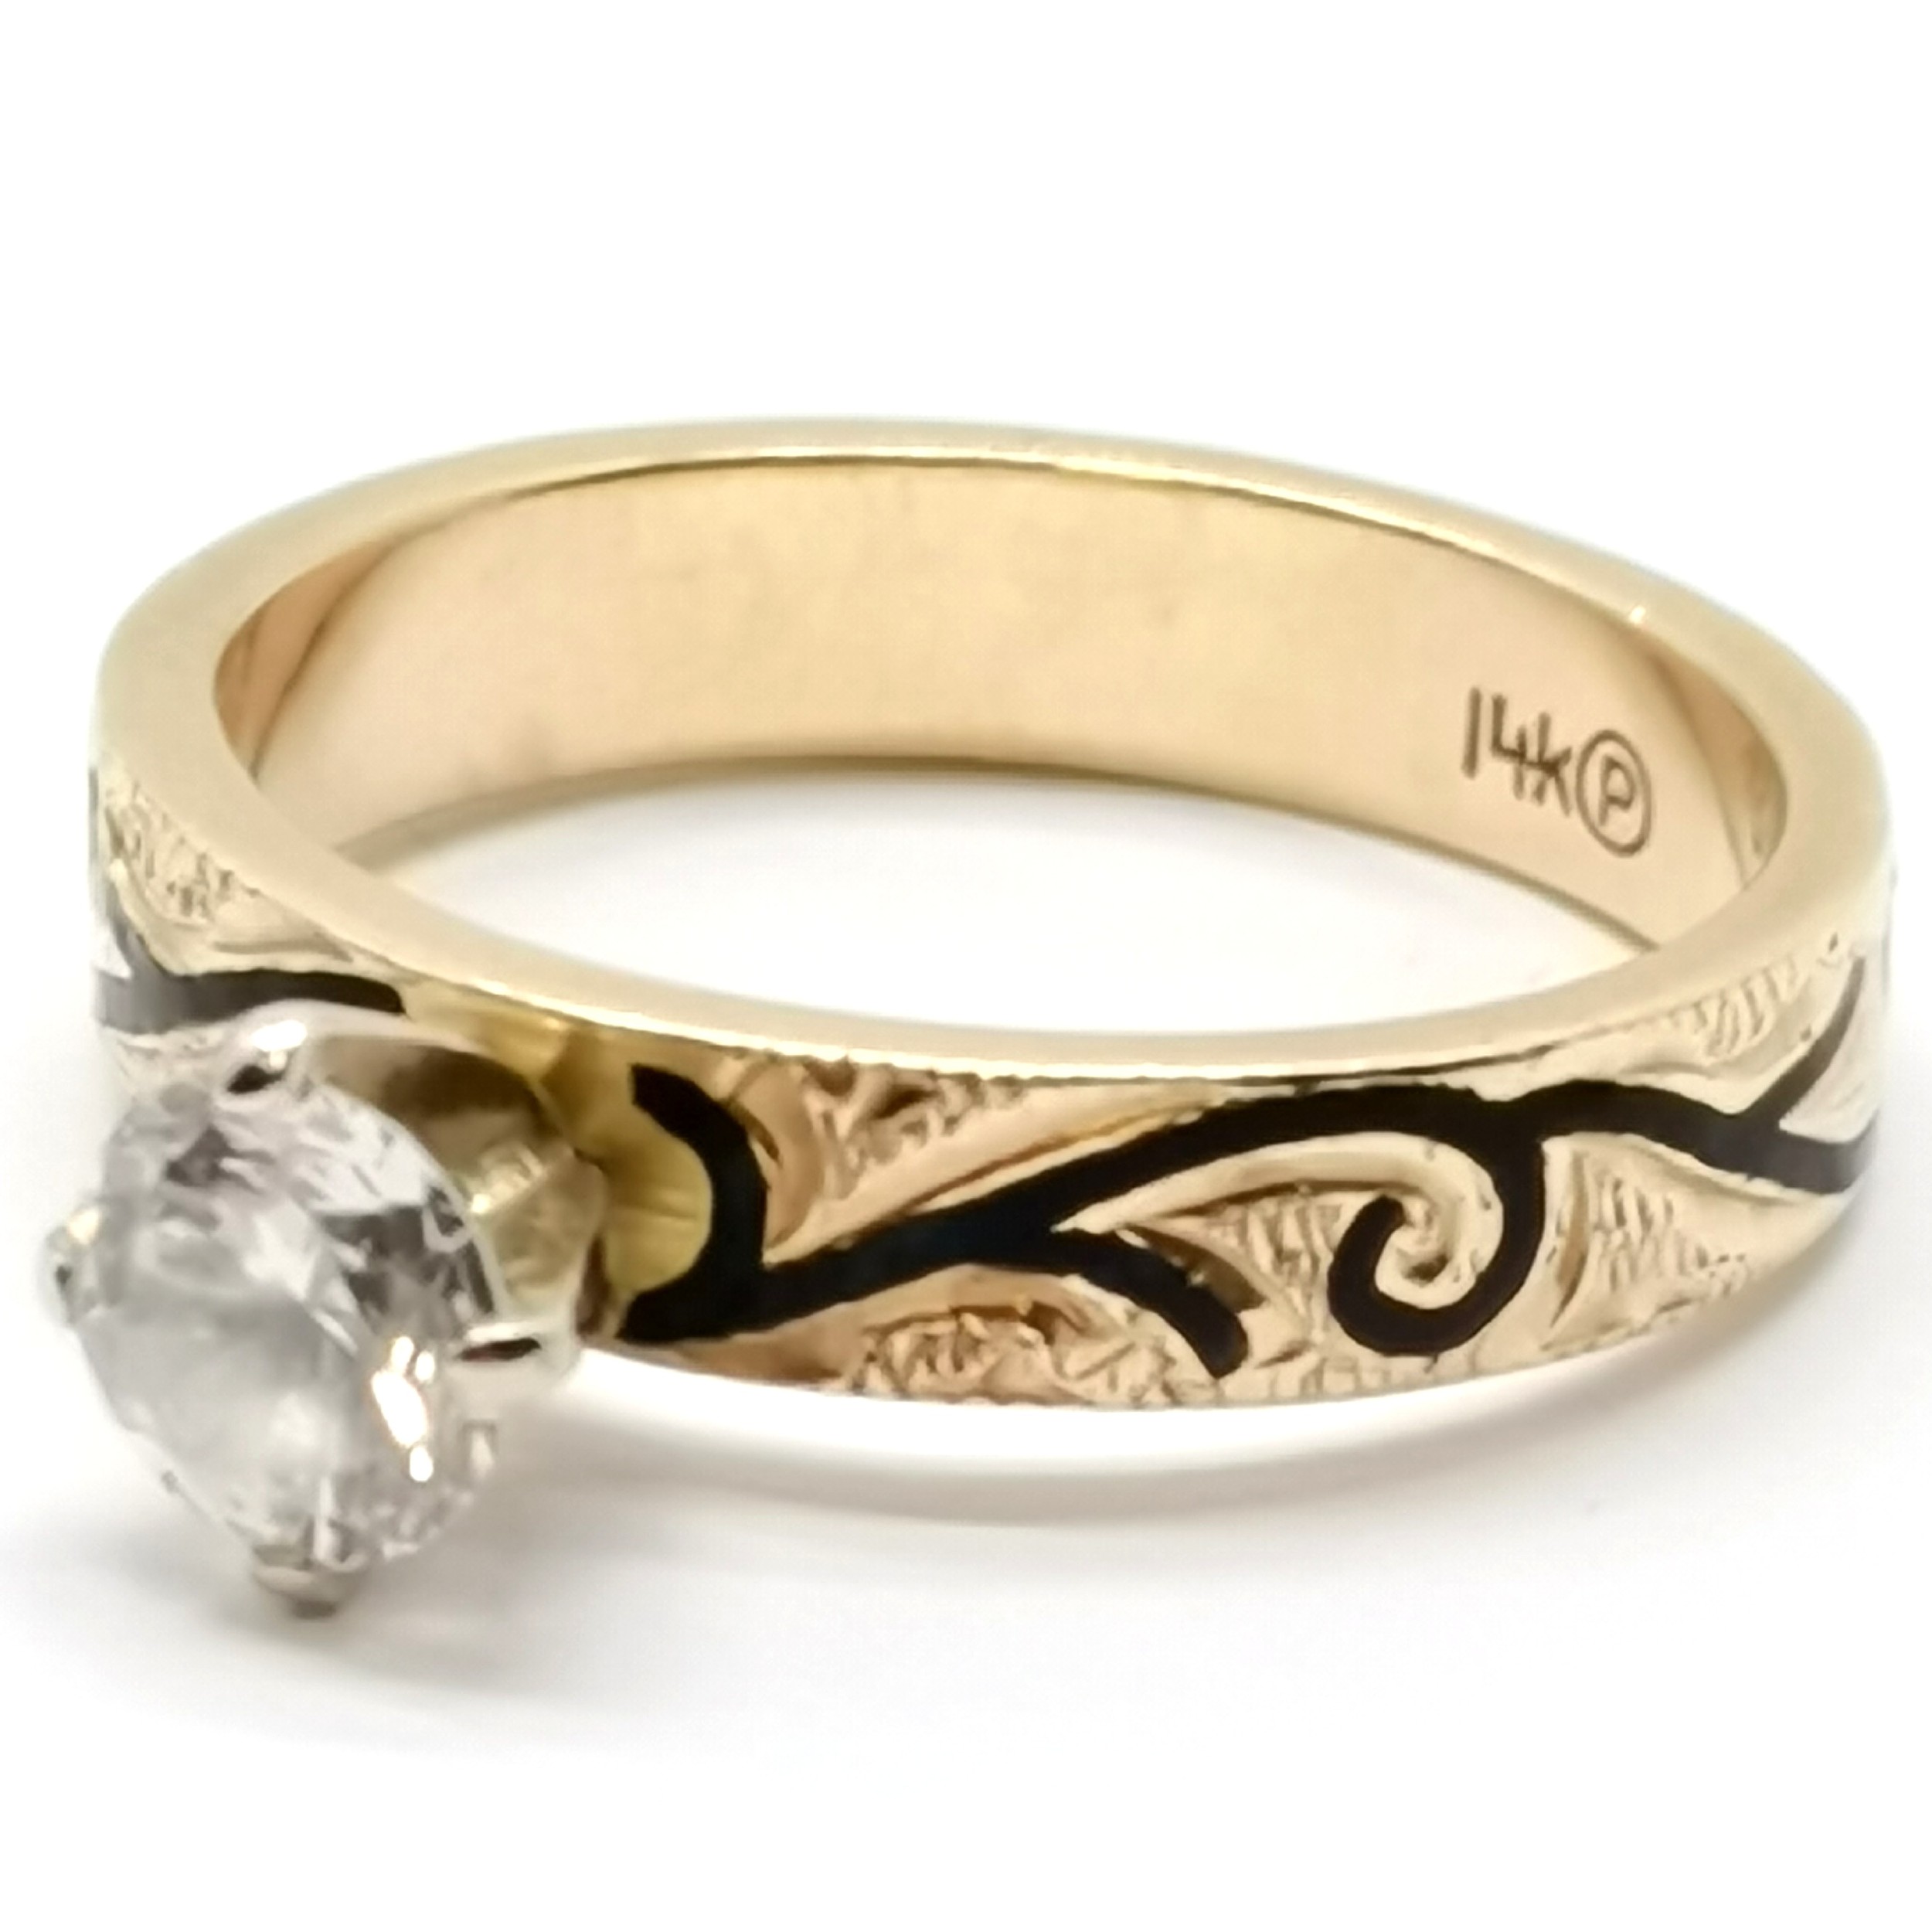 14ct marked gold high white stone set ring with enamel decoration and chased engraving - size N & - Image 3 of 4